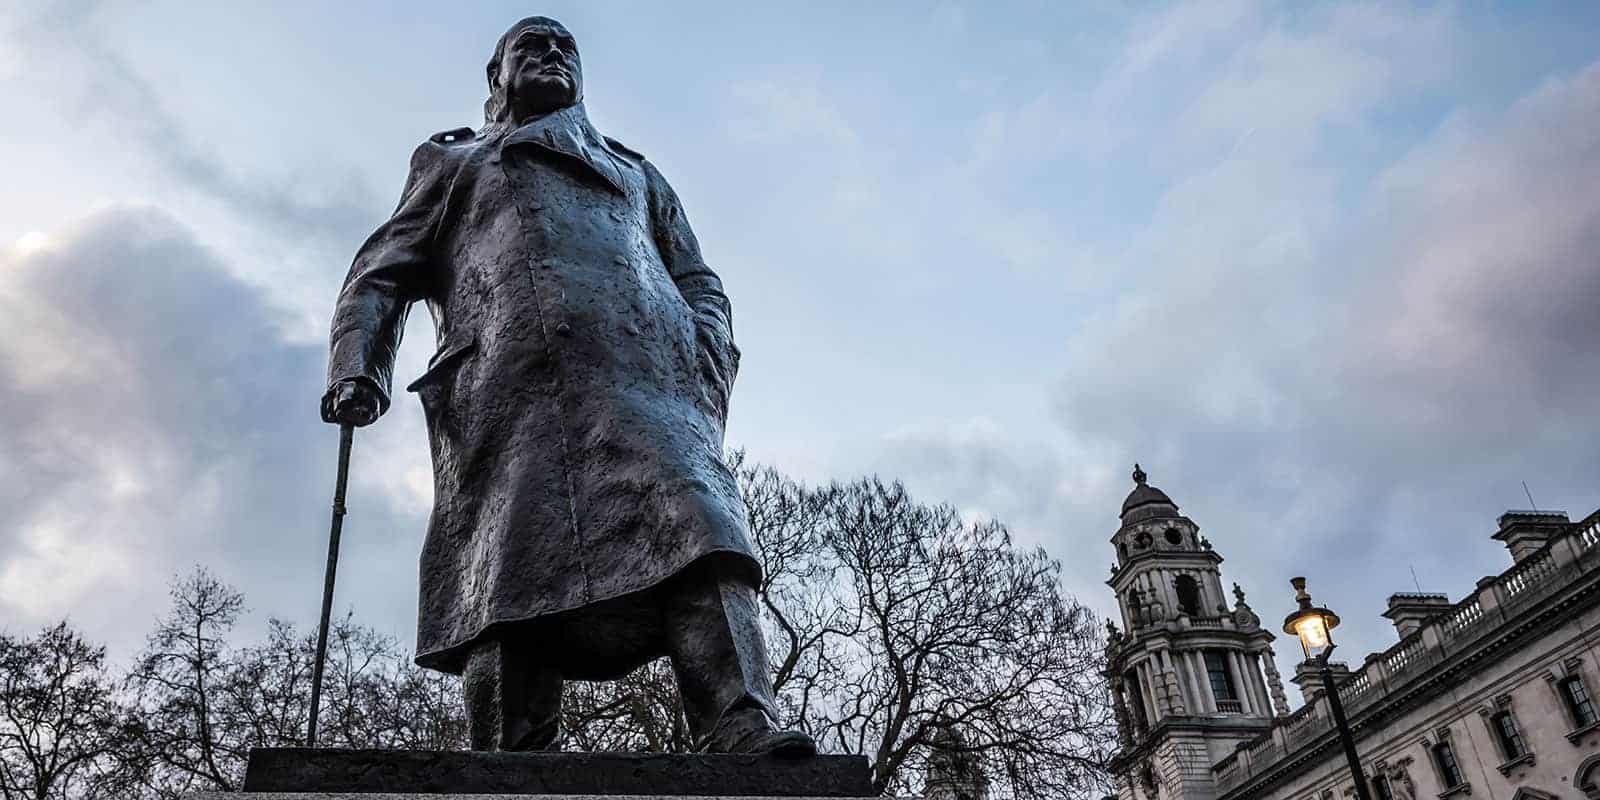 A picture of the Churchill statue in Parliament Square, Westminster, London.